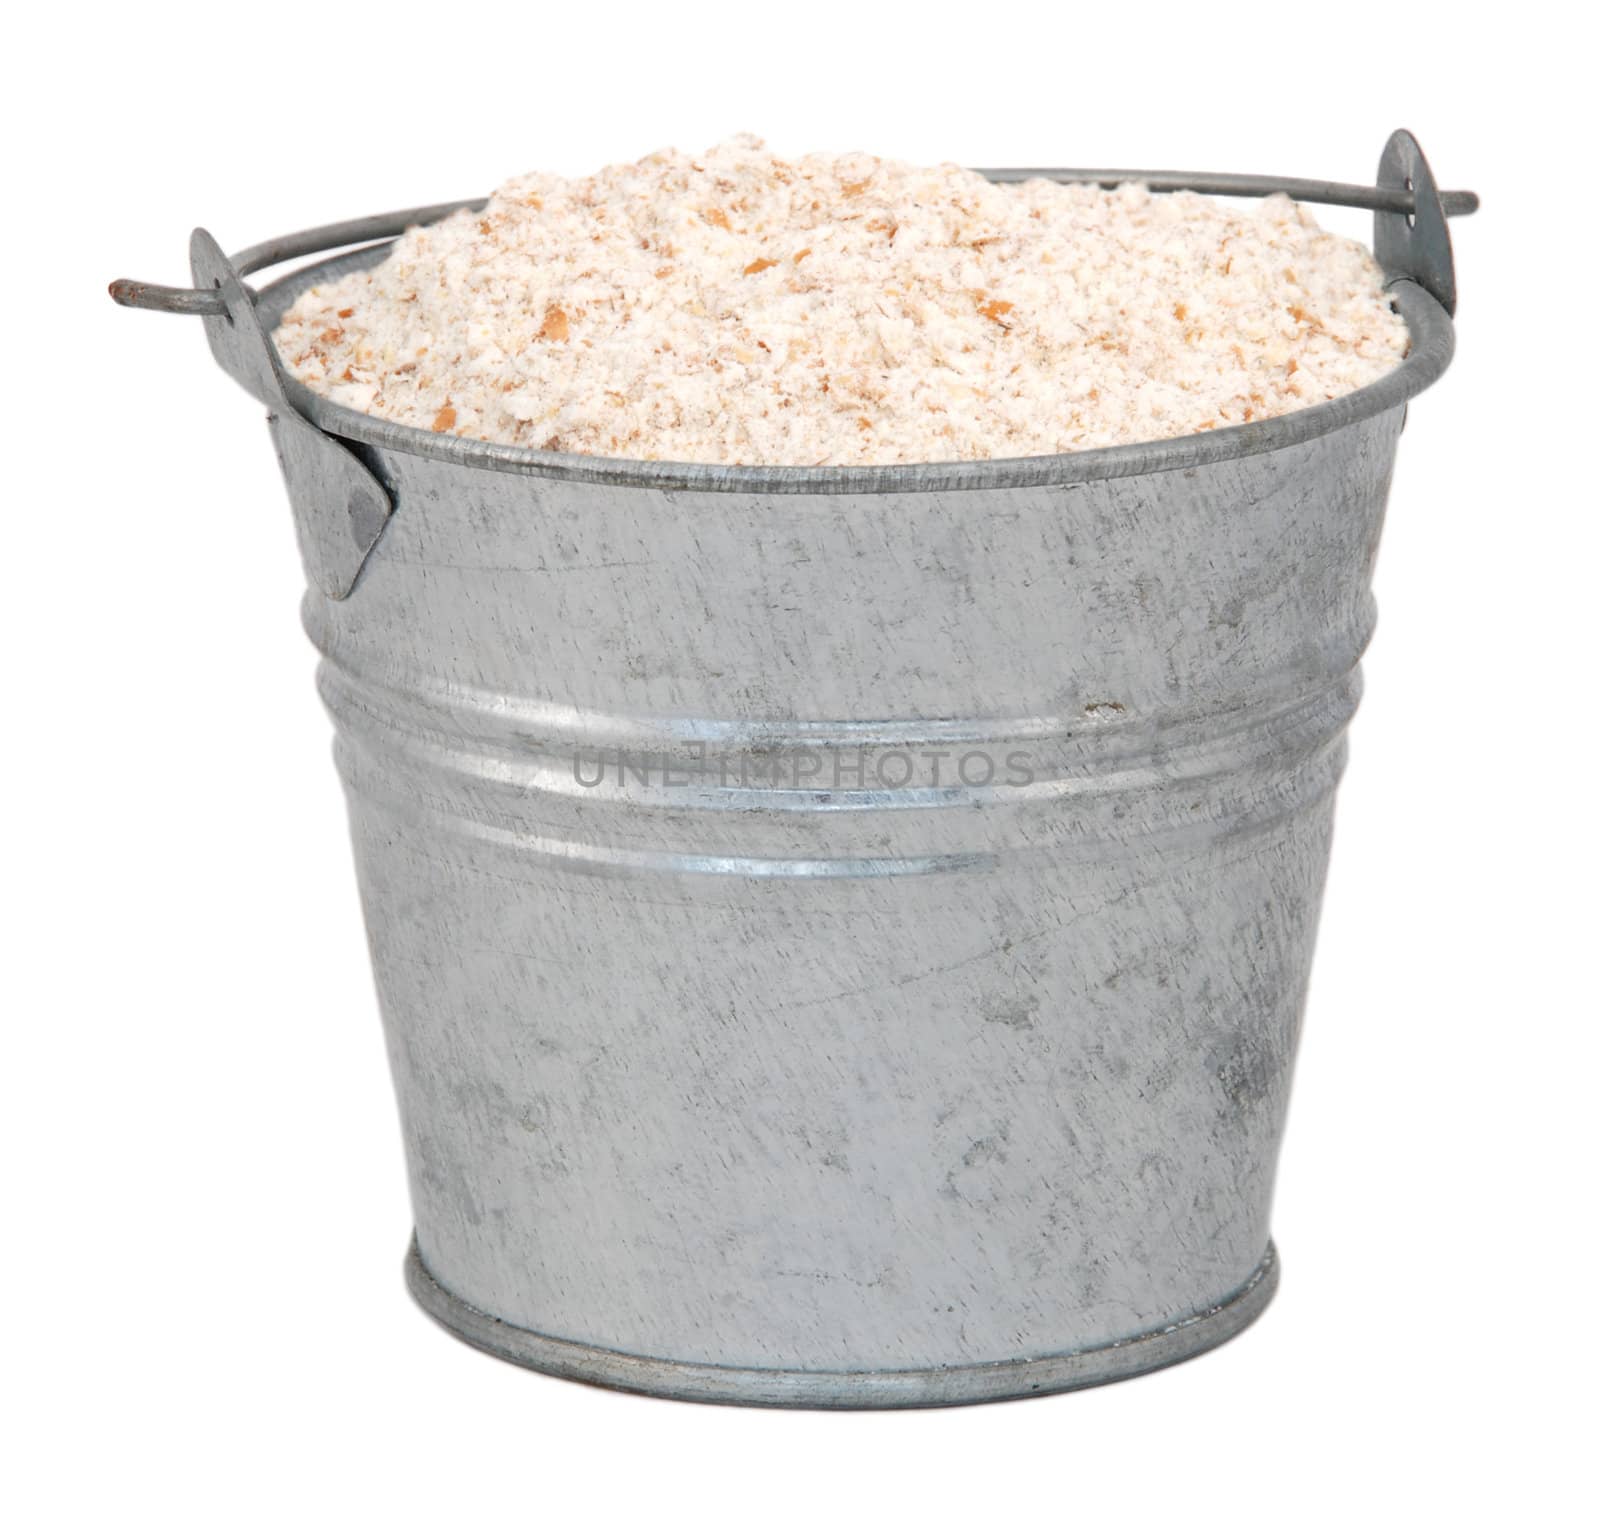 Wholemeal / wheatmeal / brown flour in a miniature metal bucket, isolated on a white background